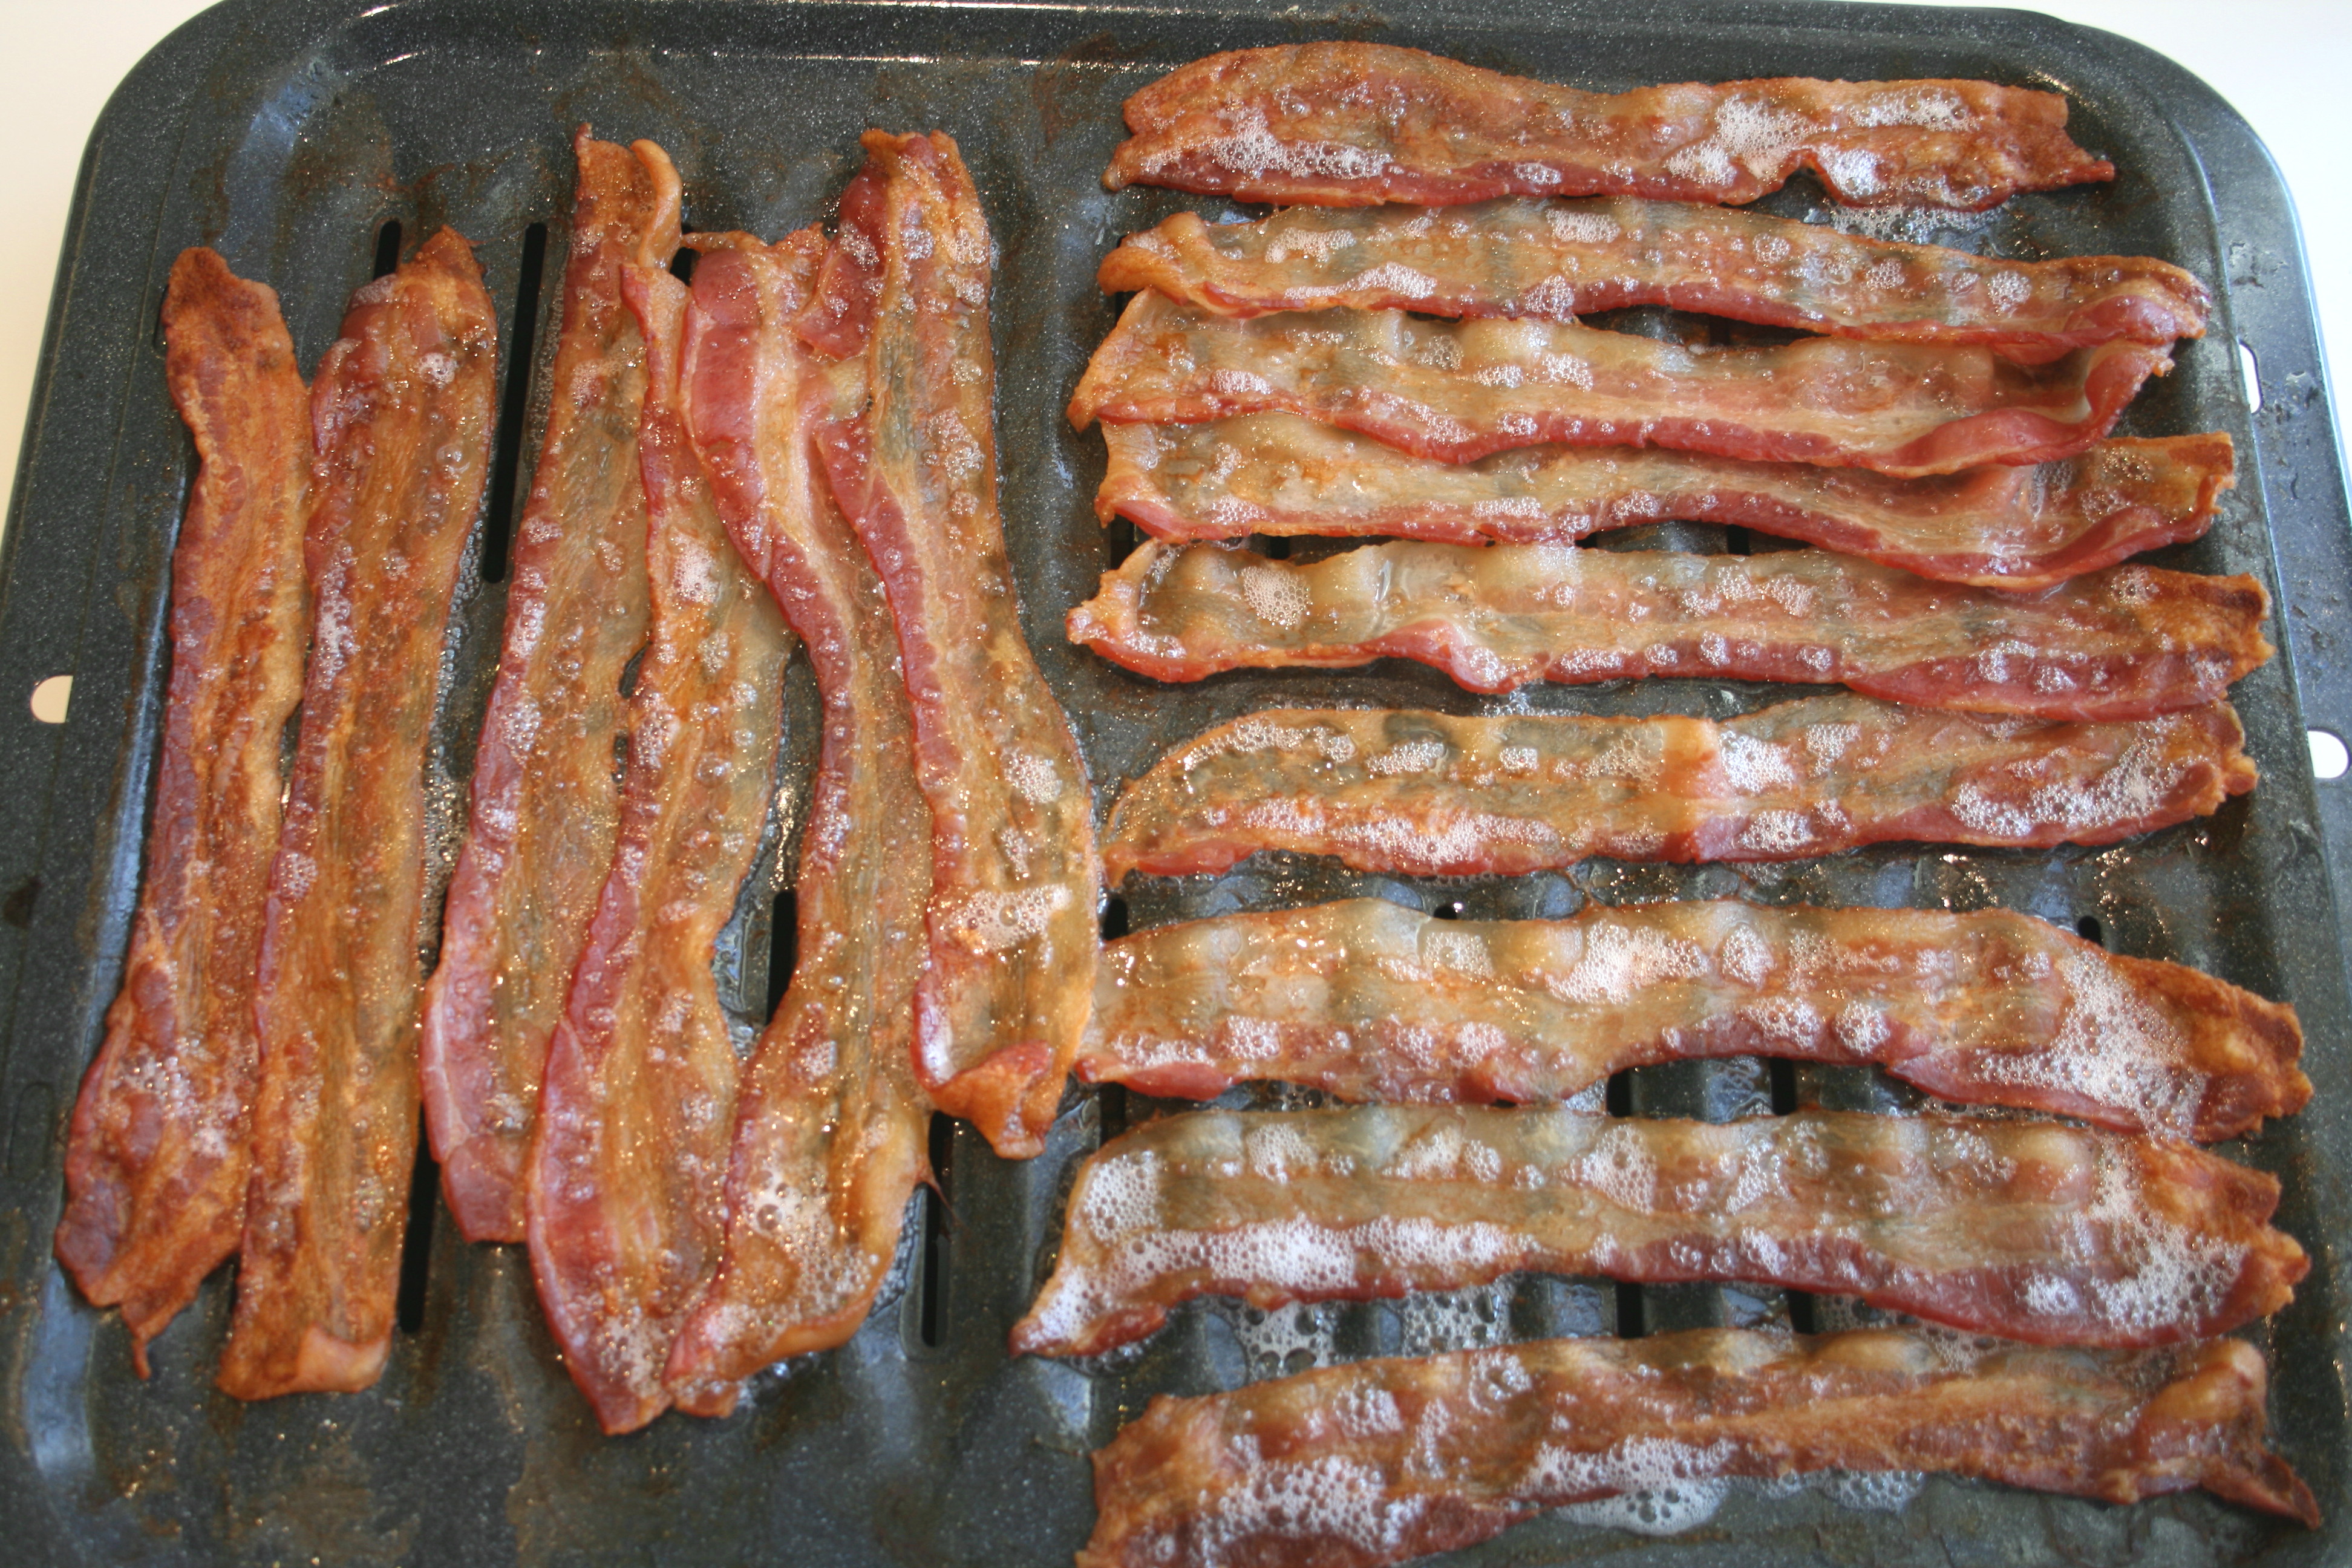 Shockinglydelicious Saturday Cooking Class Bacon In The Oven Shockingly Delicious,Hot Tottie Recipe